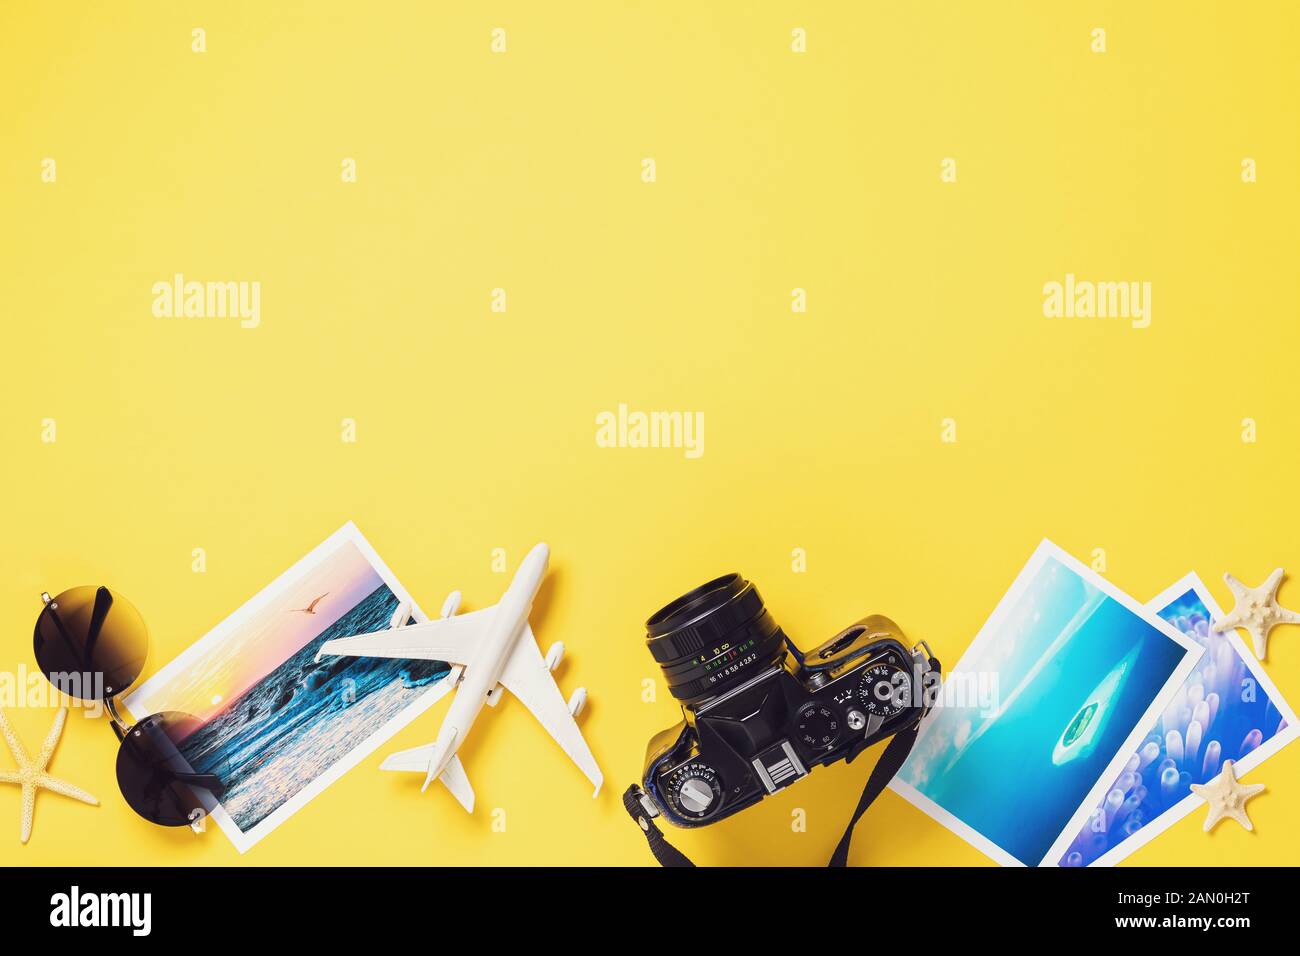 Toy airplane, glasses, photographs and a camera on a colored paper background with copy space. Travel concept Stock Photo